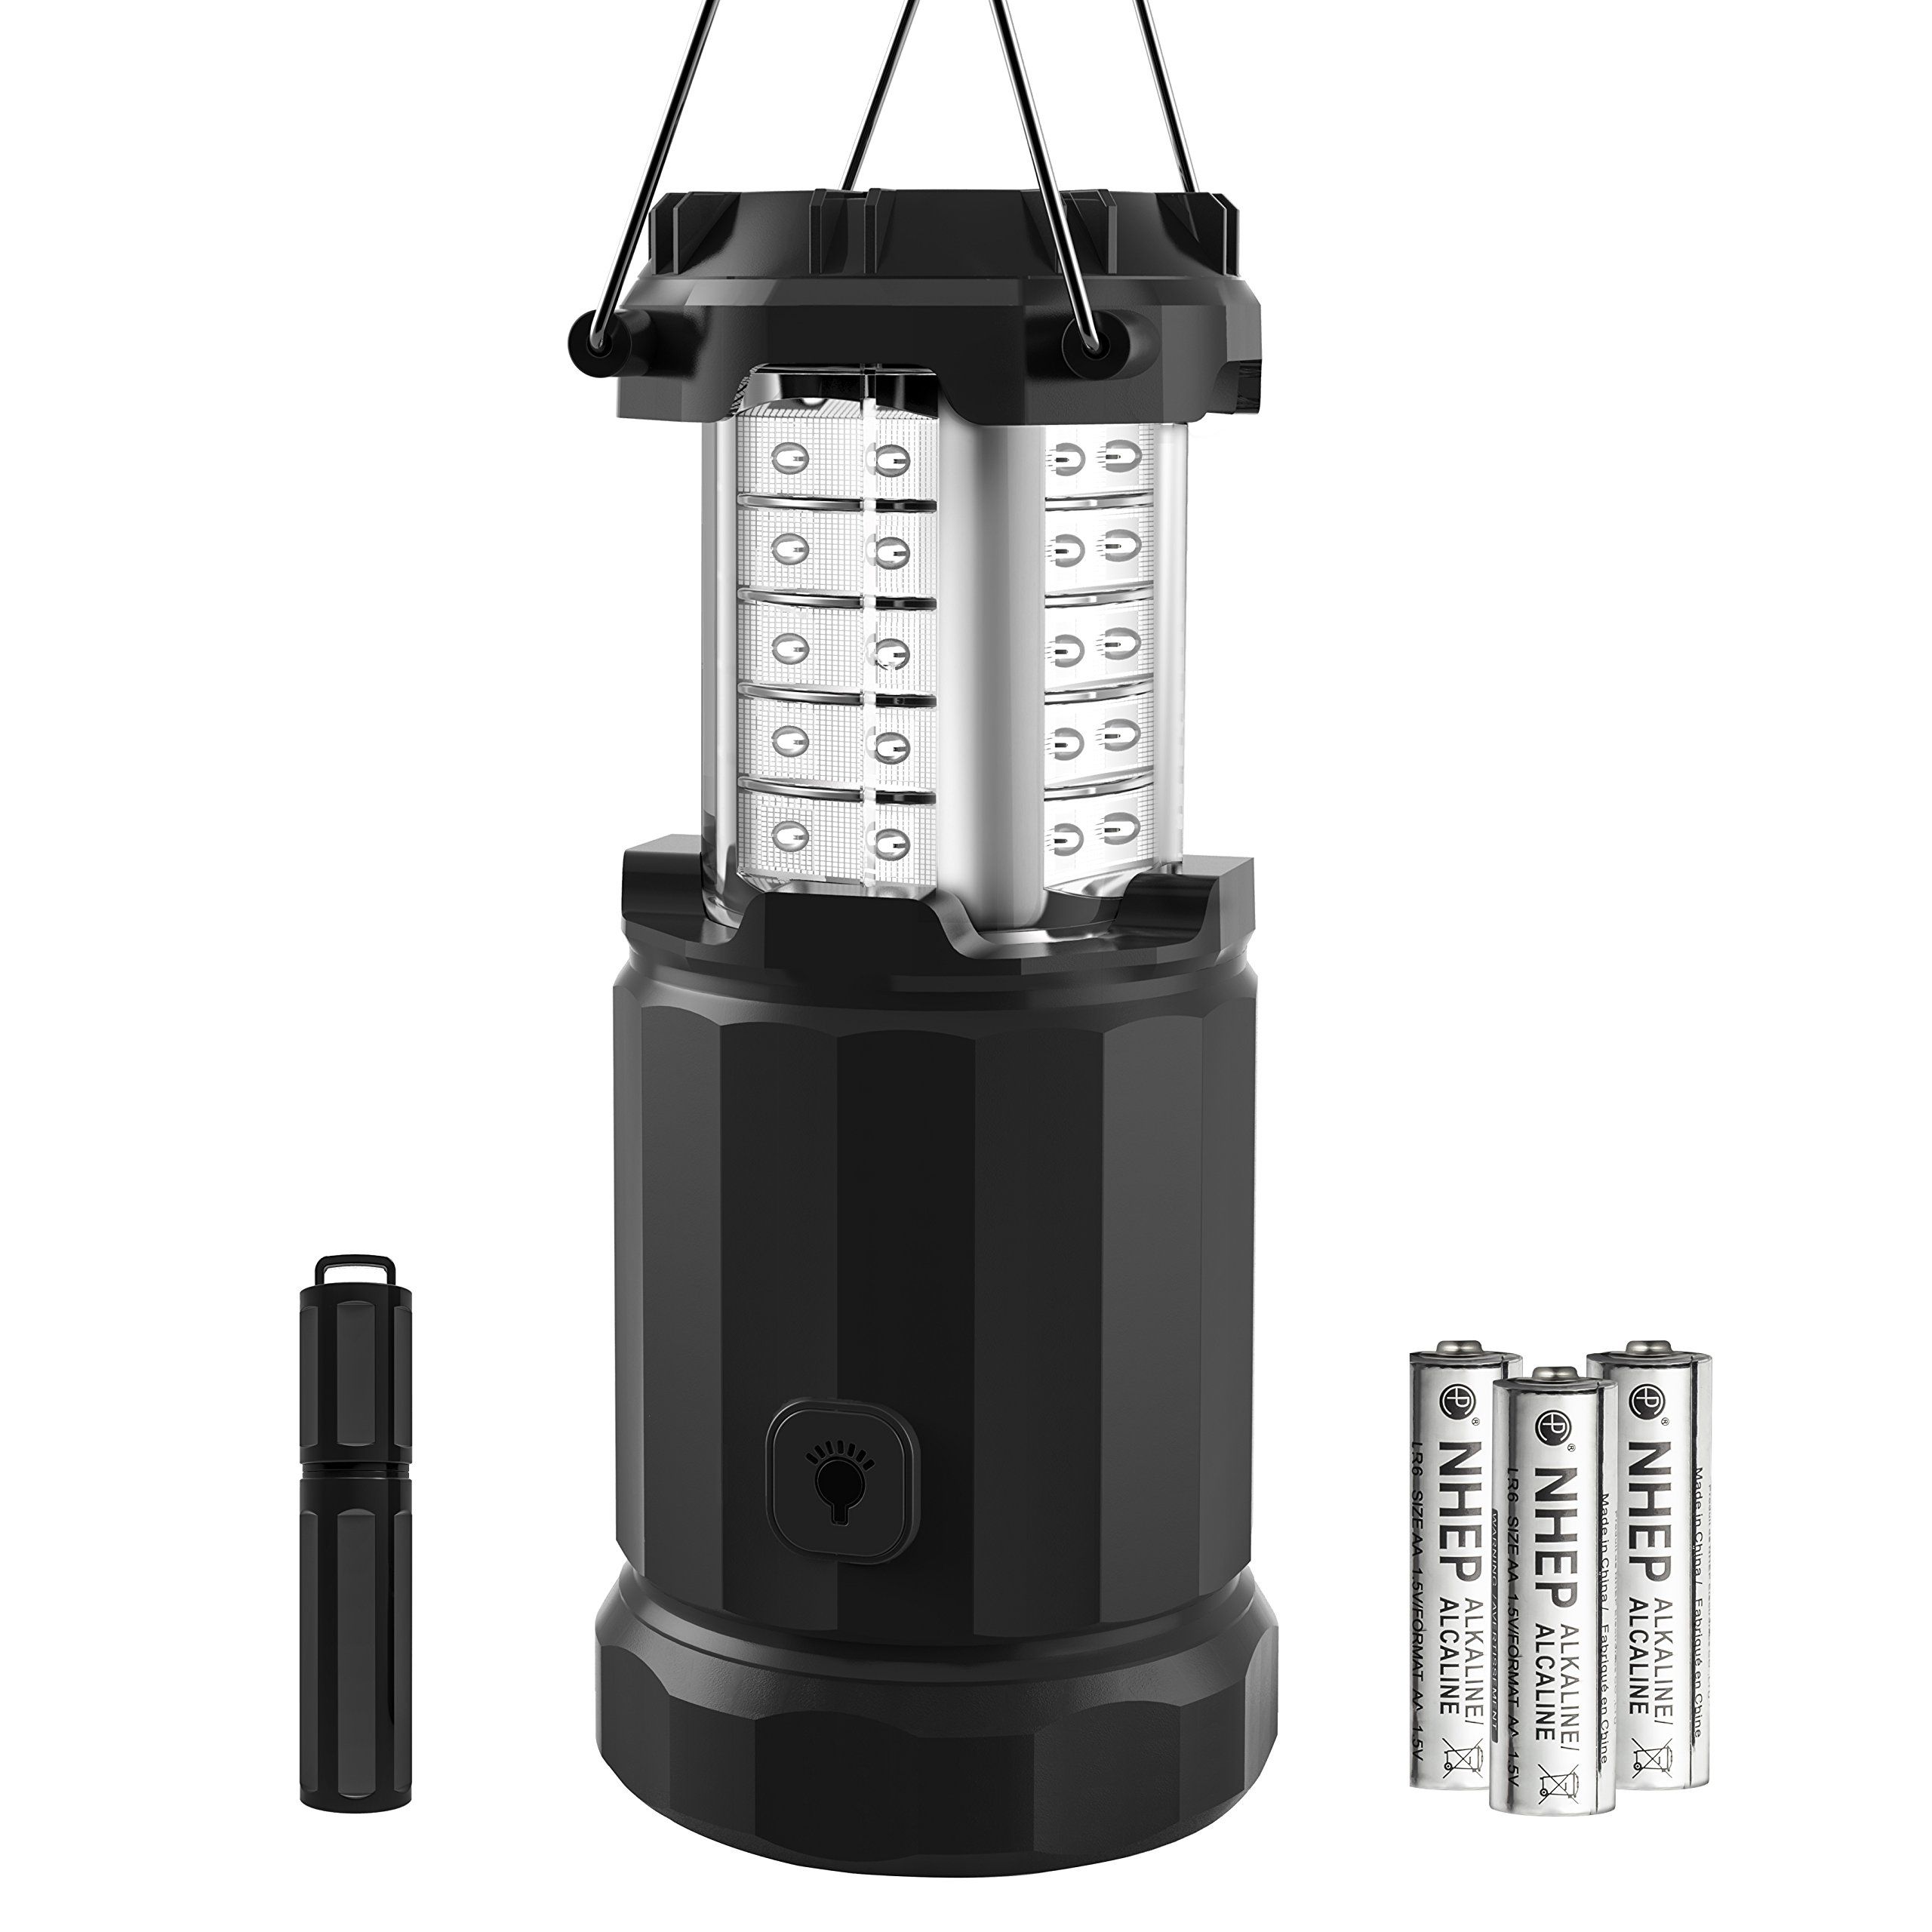 Best Rated In Outdoor Tabletop Lanterns & Helpful Customer Reviews Throughout Outdoor Storm Lanterns (View 13 of 20)